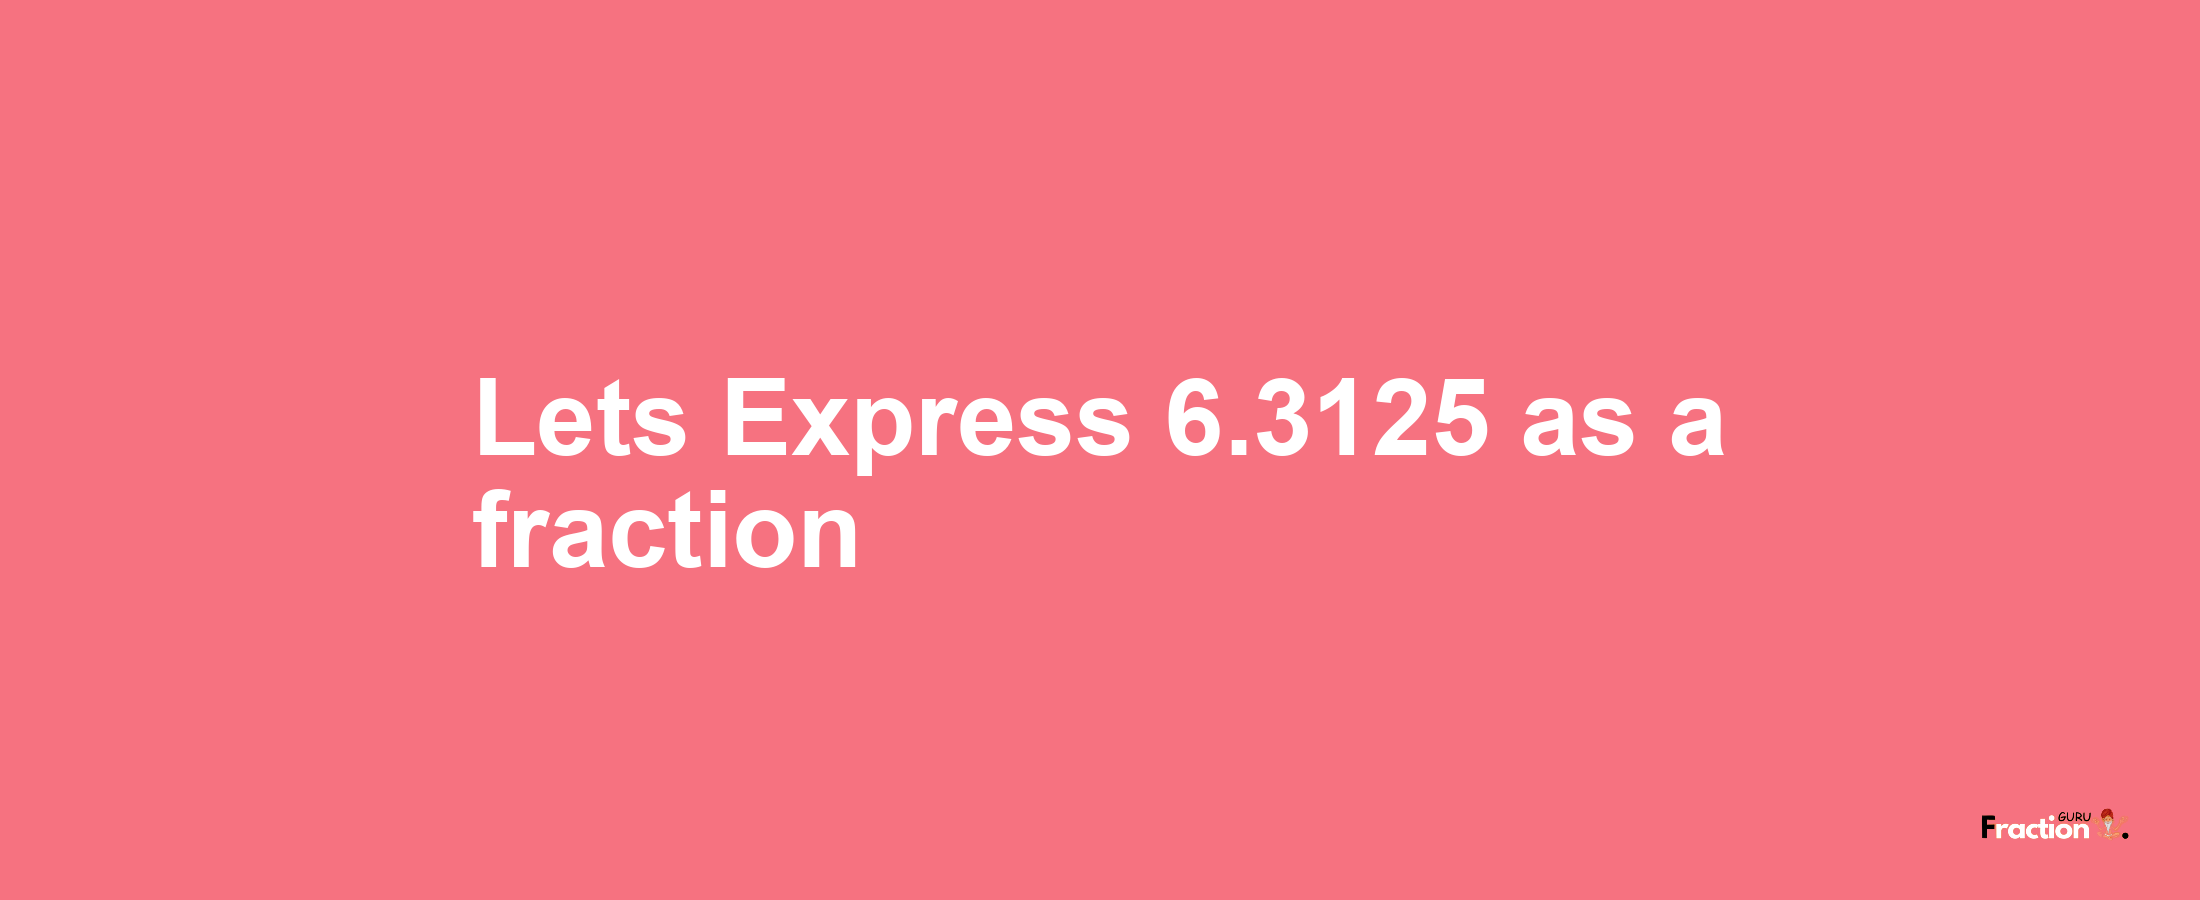 Lets Express 6.3125 as afraction